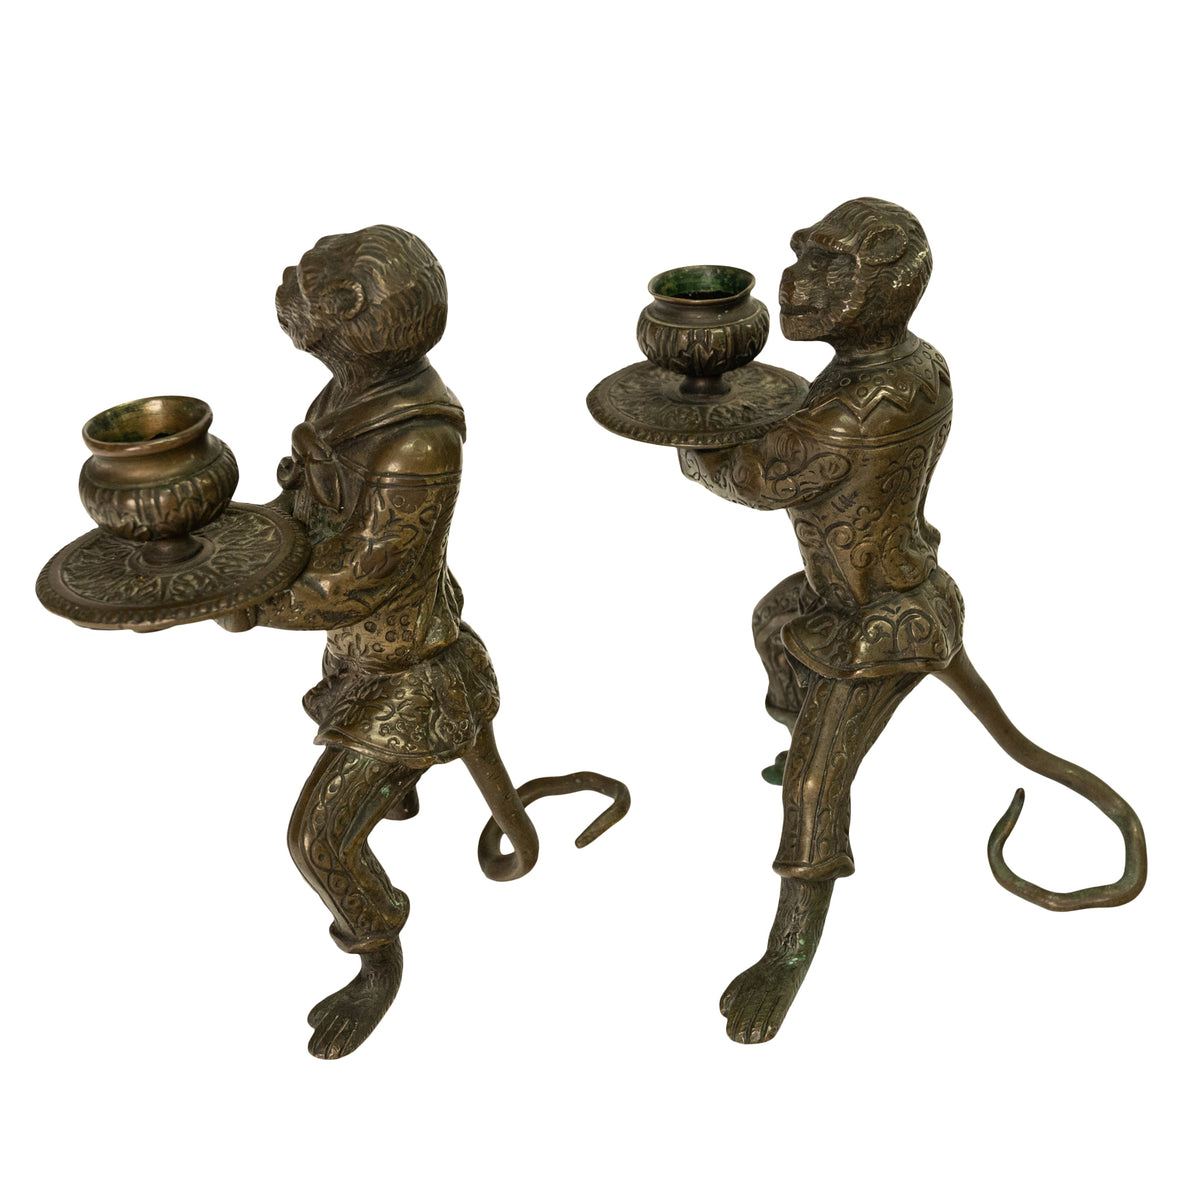 Pair Antique French Bronze Figural Monkey Statue Candleholders Candlesticks 1900